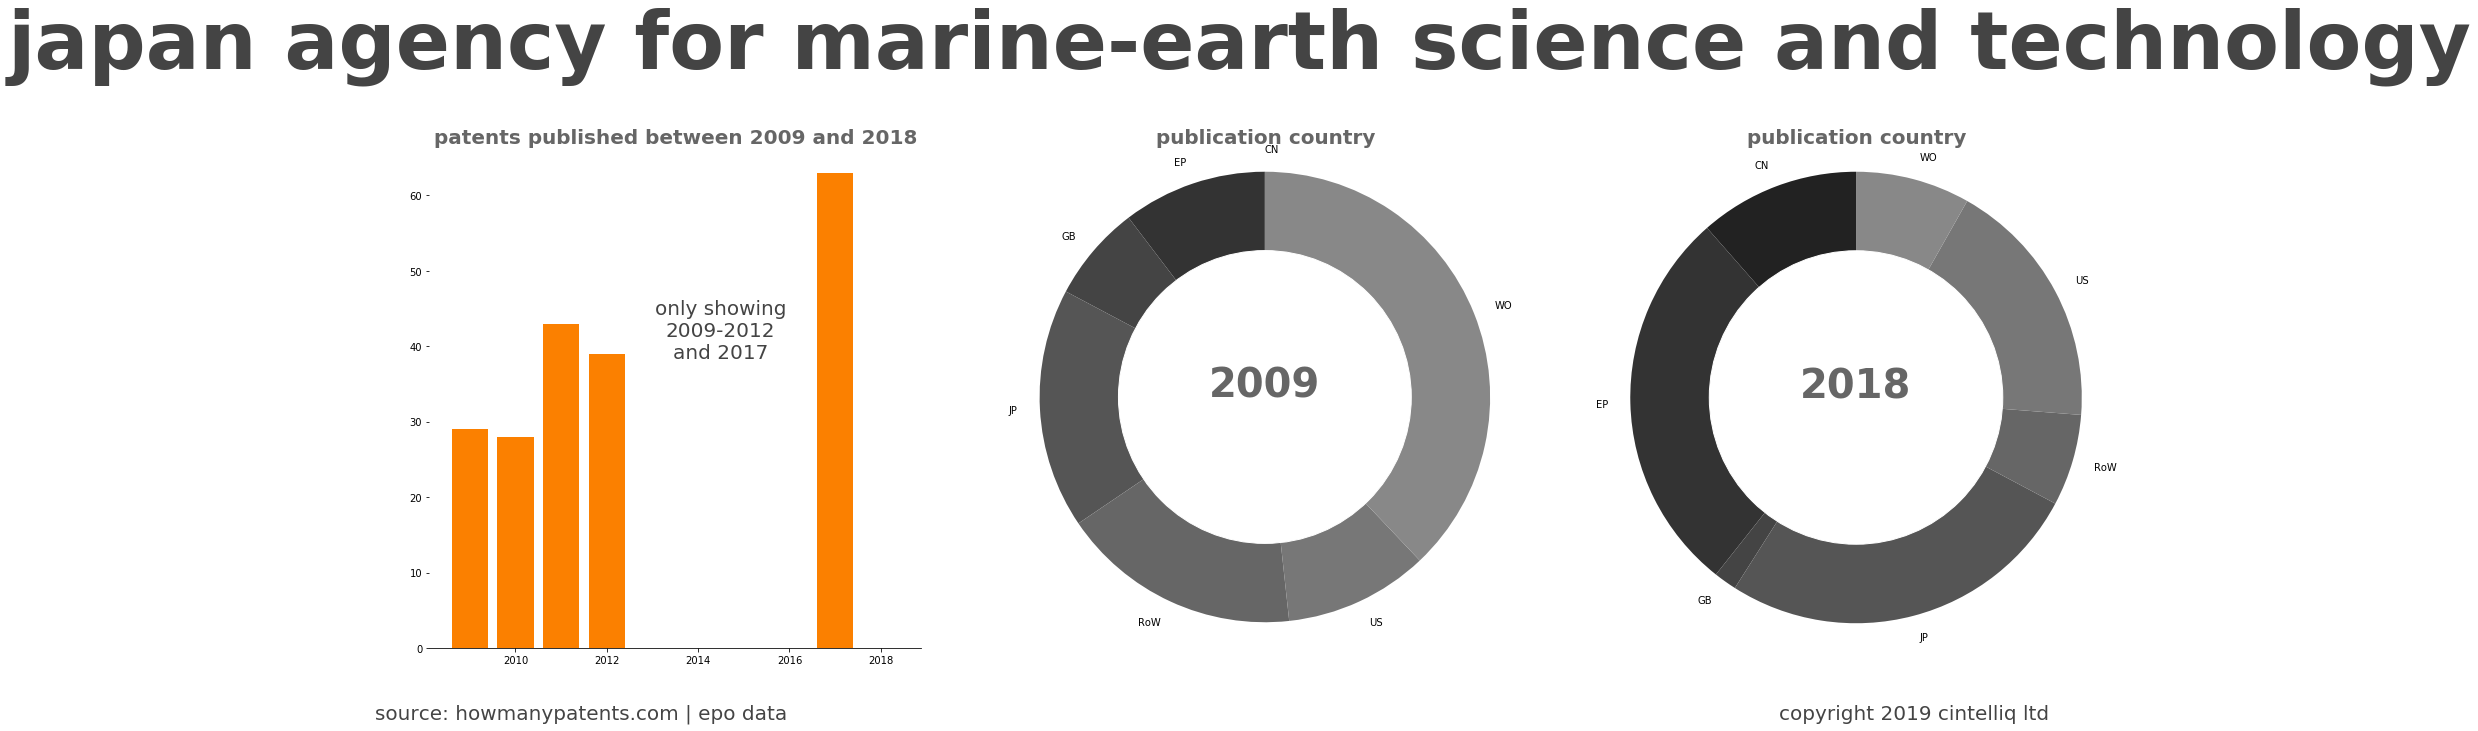 summary of patents for Japan Agency For Marine-Earth Science And Technology